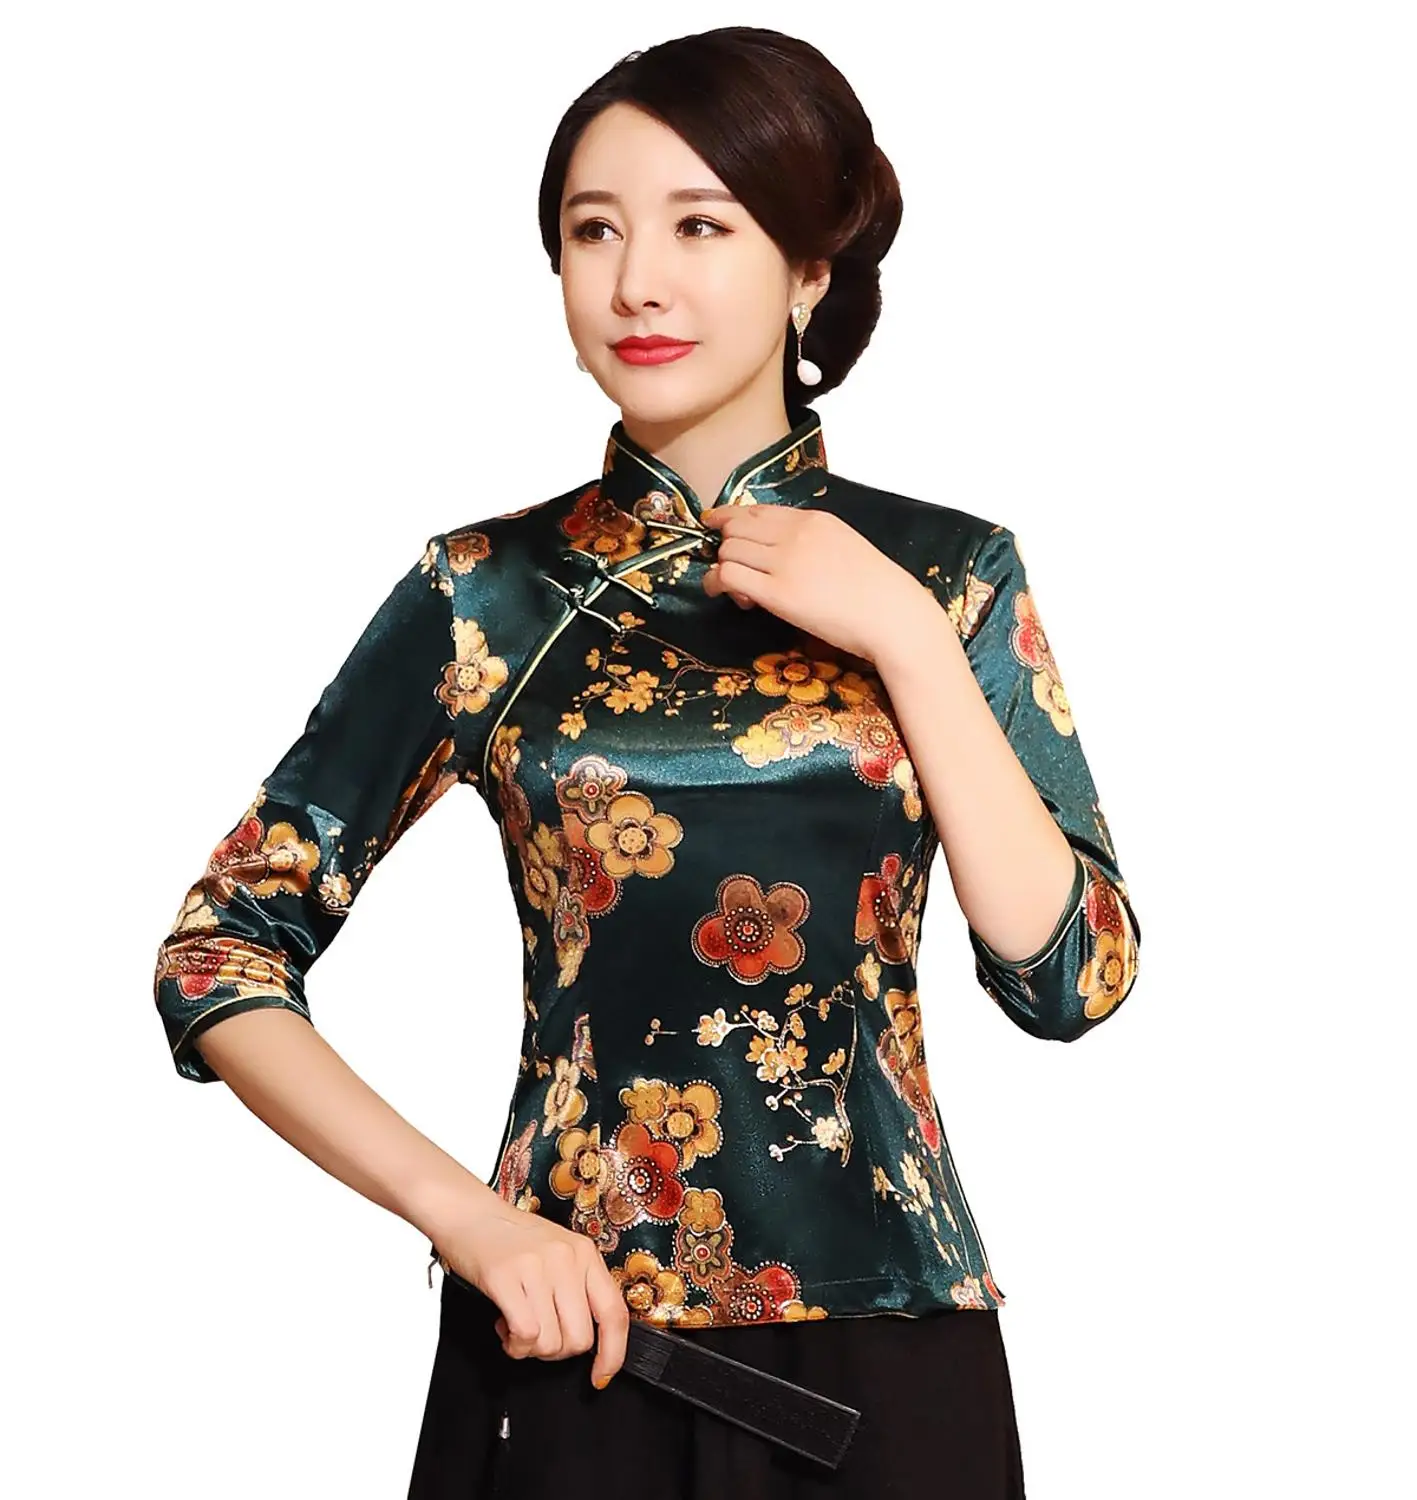  Shanghai Story Chinese Button Woman's Shirt chinese traditional top 3/4 Sleeve cheongsam top Velvet